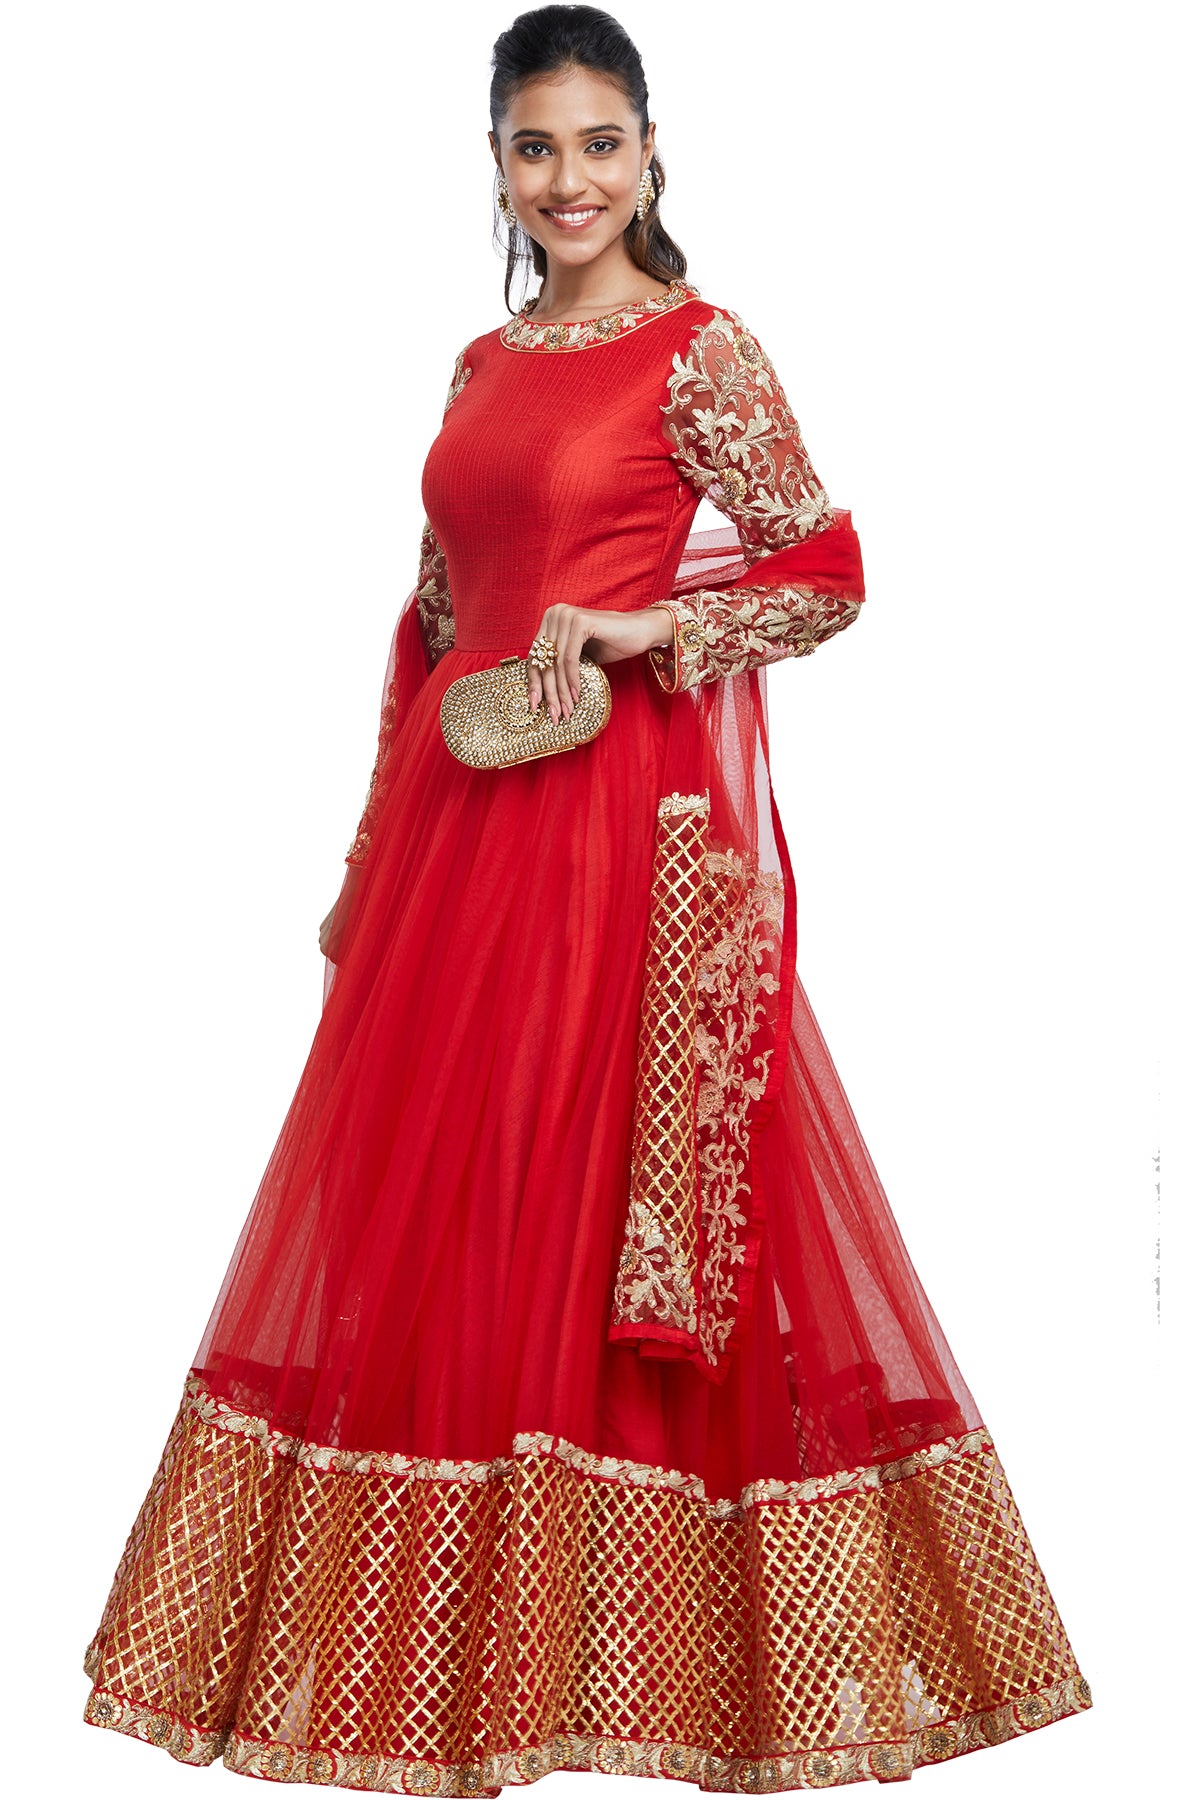 A small sartorial step toward style, and a giant leap toward unequivocal fashion - this red high neck lehenga with an open back and embroidered dupatta exudes a palpable level of confidence.